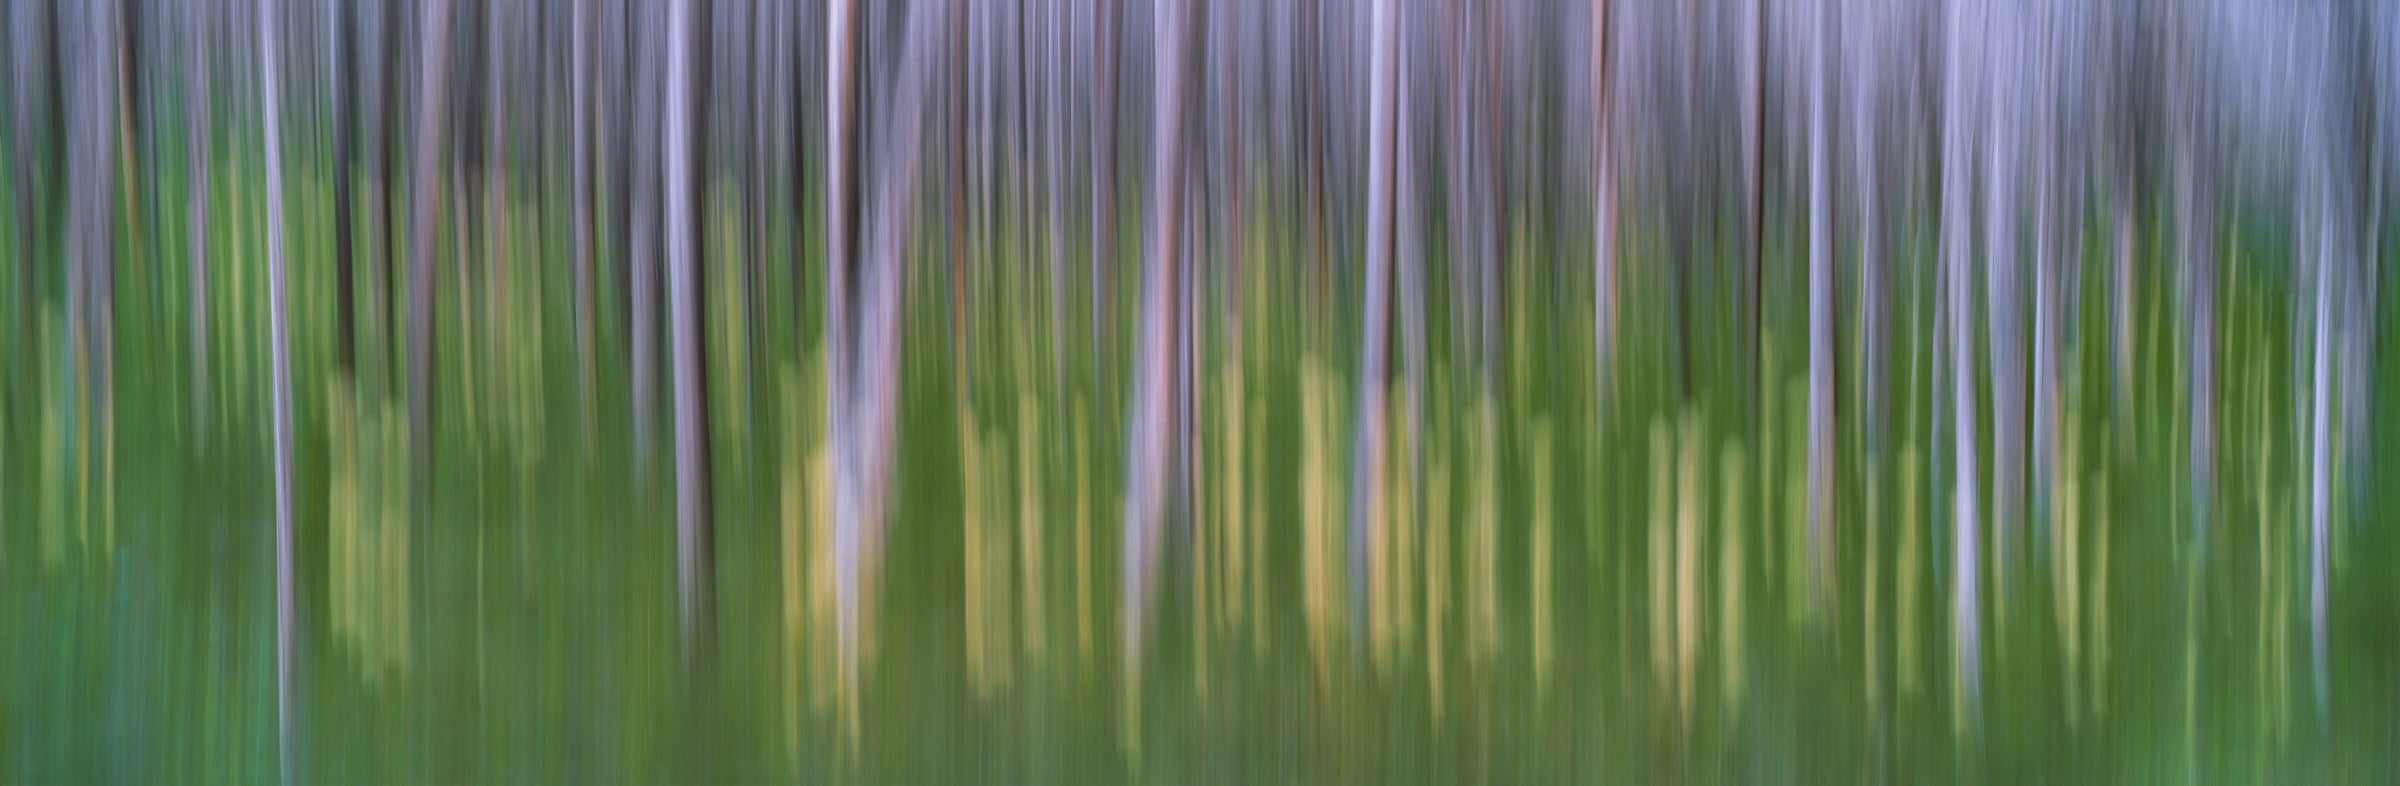 328 megapixels! A very high resolution, large-format abstract photo print of a forest nature scene; fine art photograph created by Scott Dimond in Waterton National Park, Alberta, Canada.